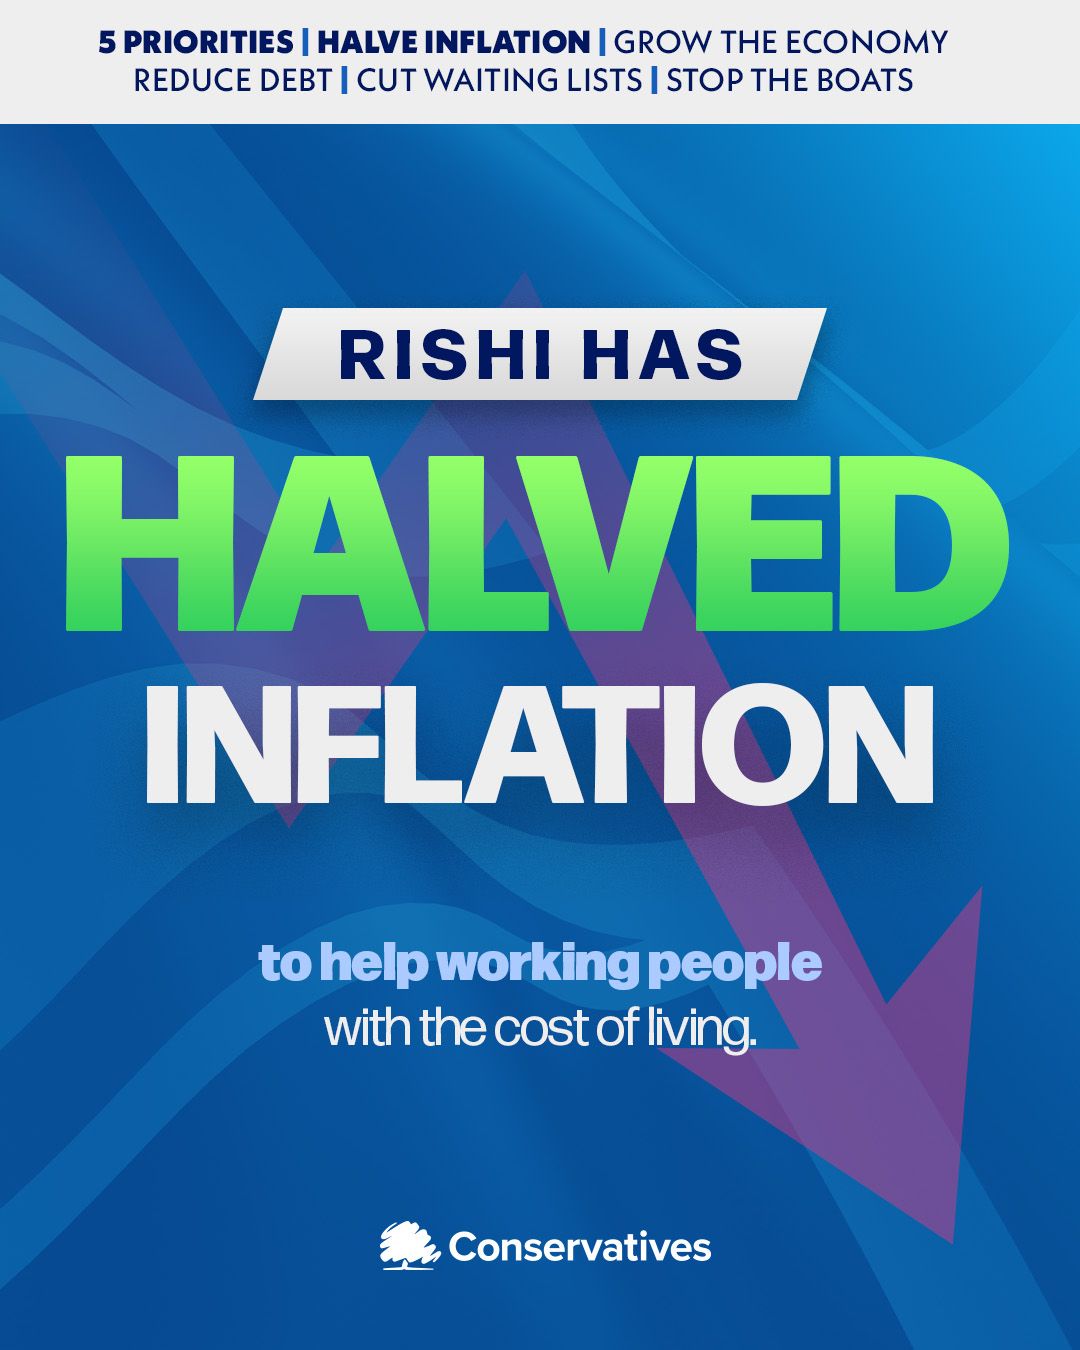 Rishi has delivered: inflation has halved